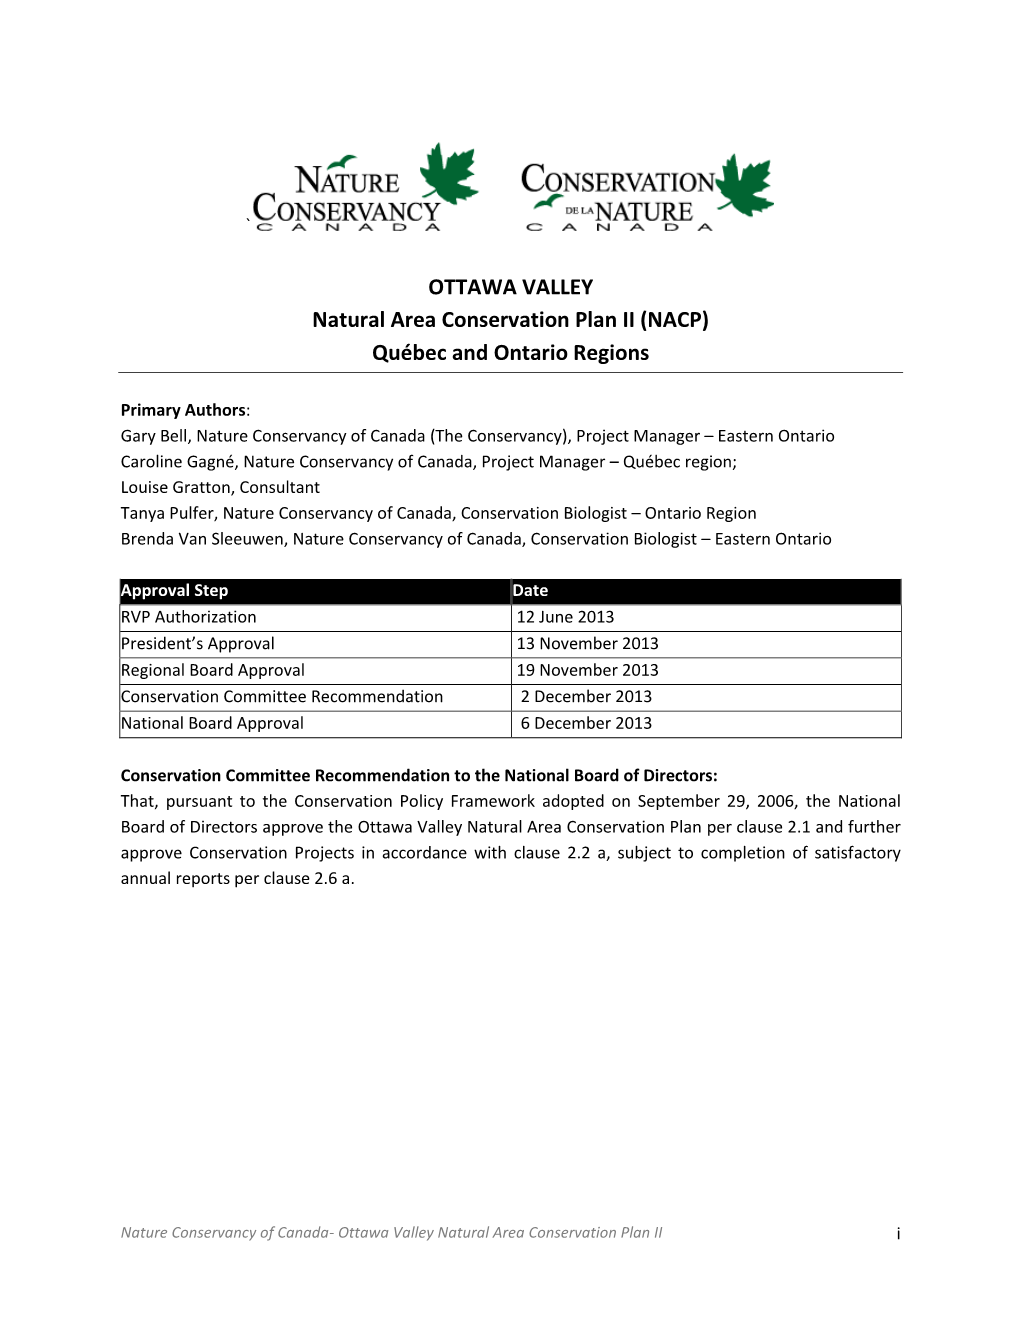 OTTAWA VALLEY Natural Area Conservation Plan II (NACP) Québec and Ontario Regions